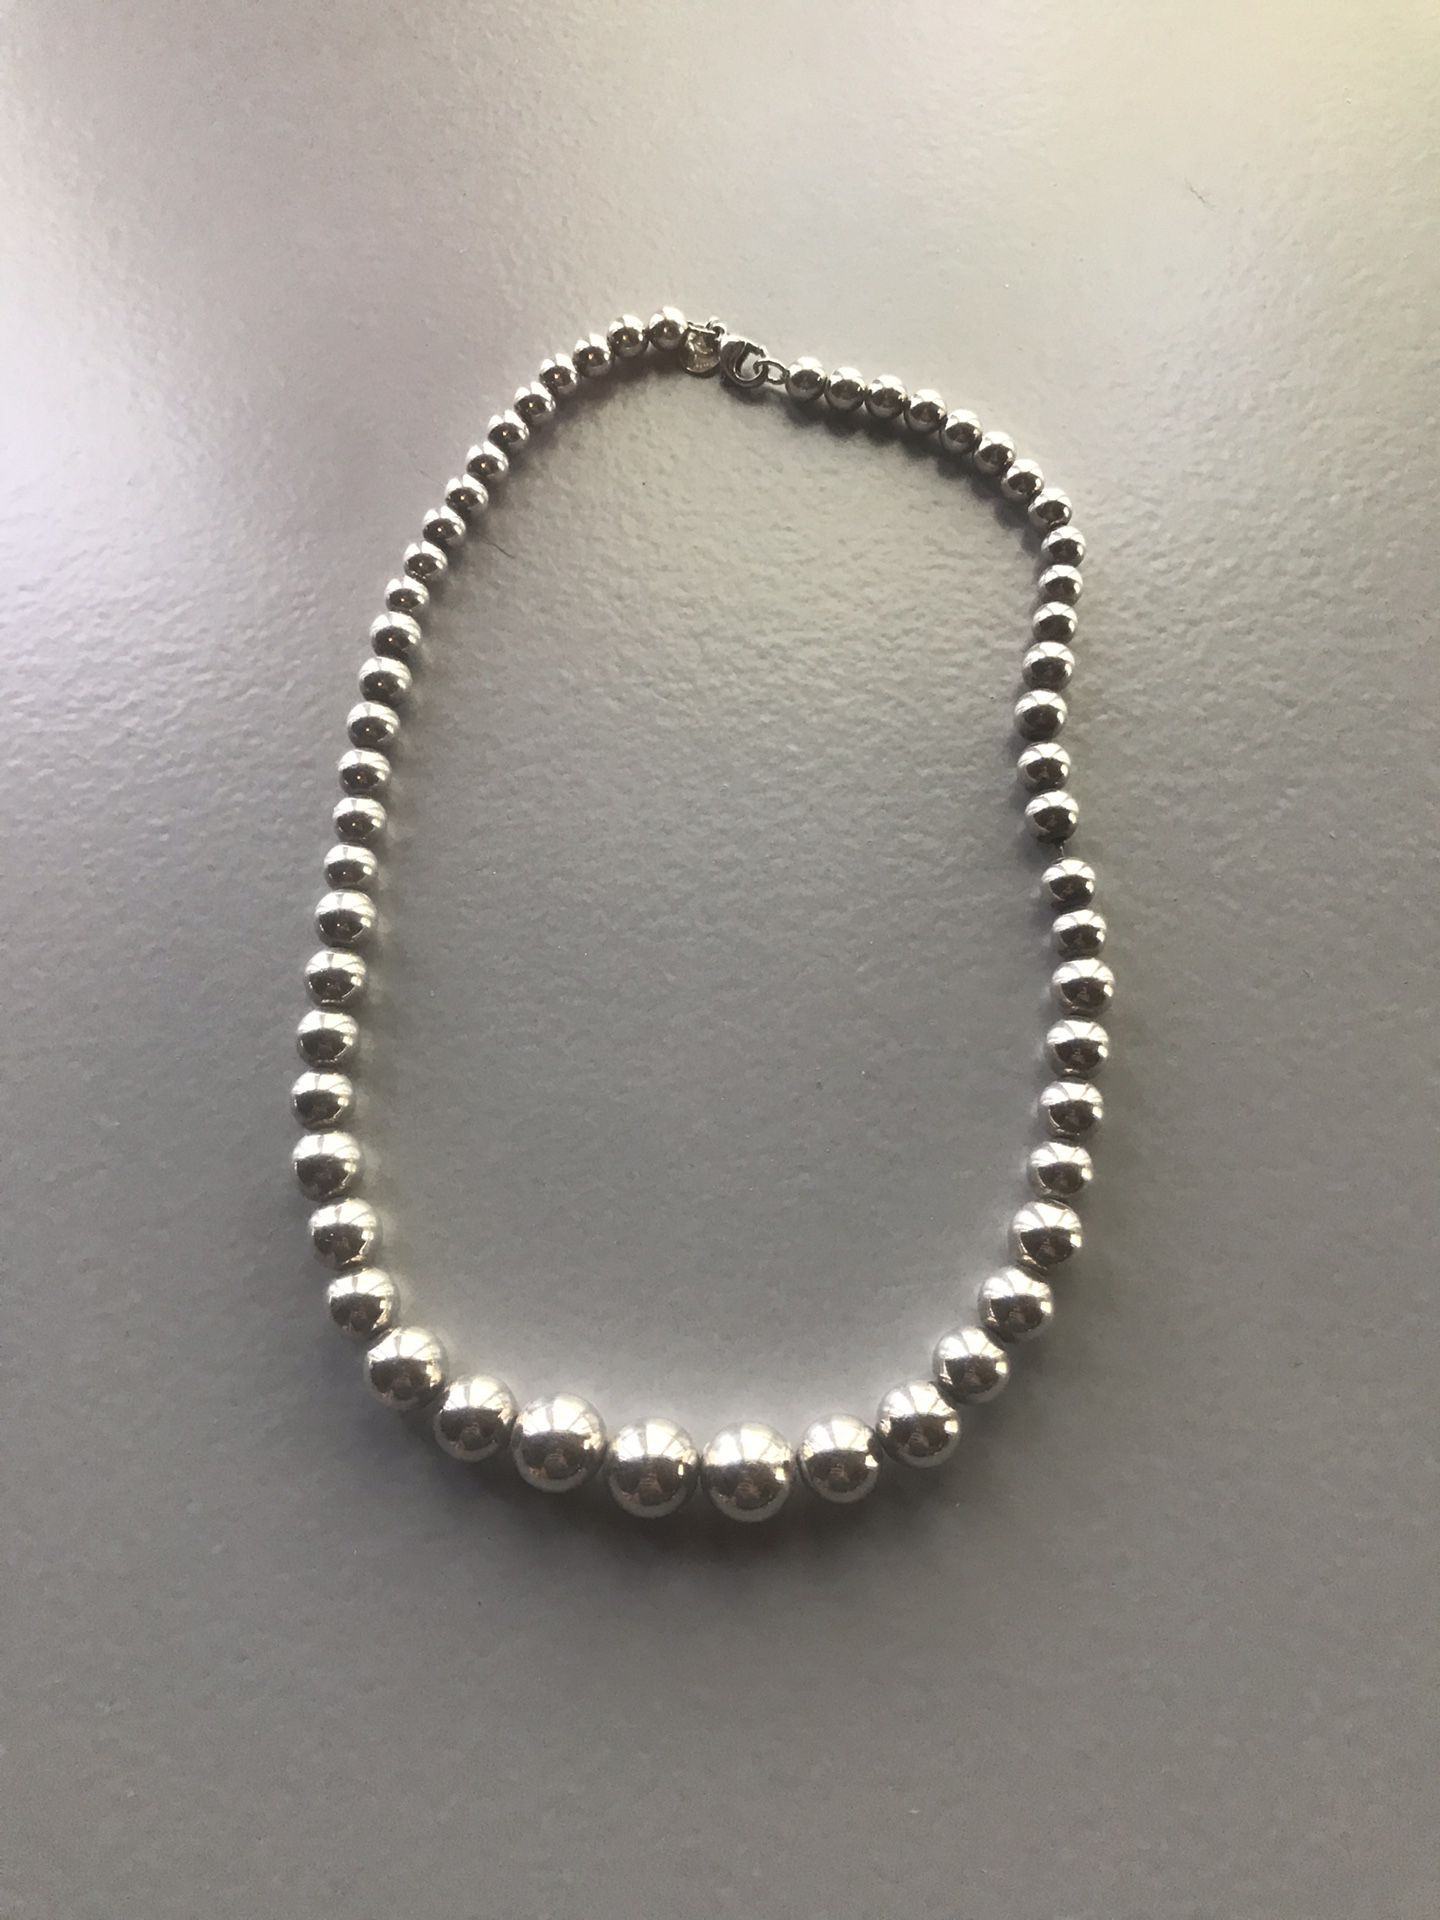 Tiffany & Co HardWese graduated ball necklace in sterling silver